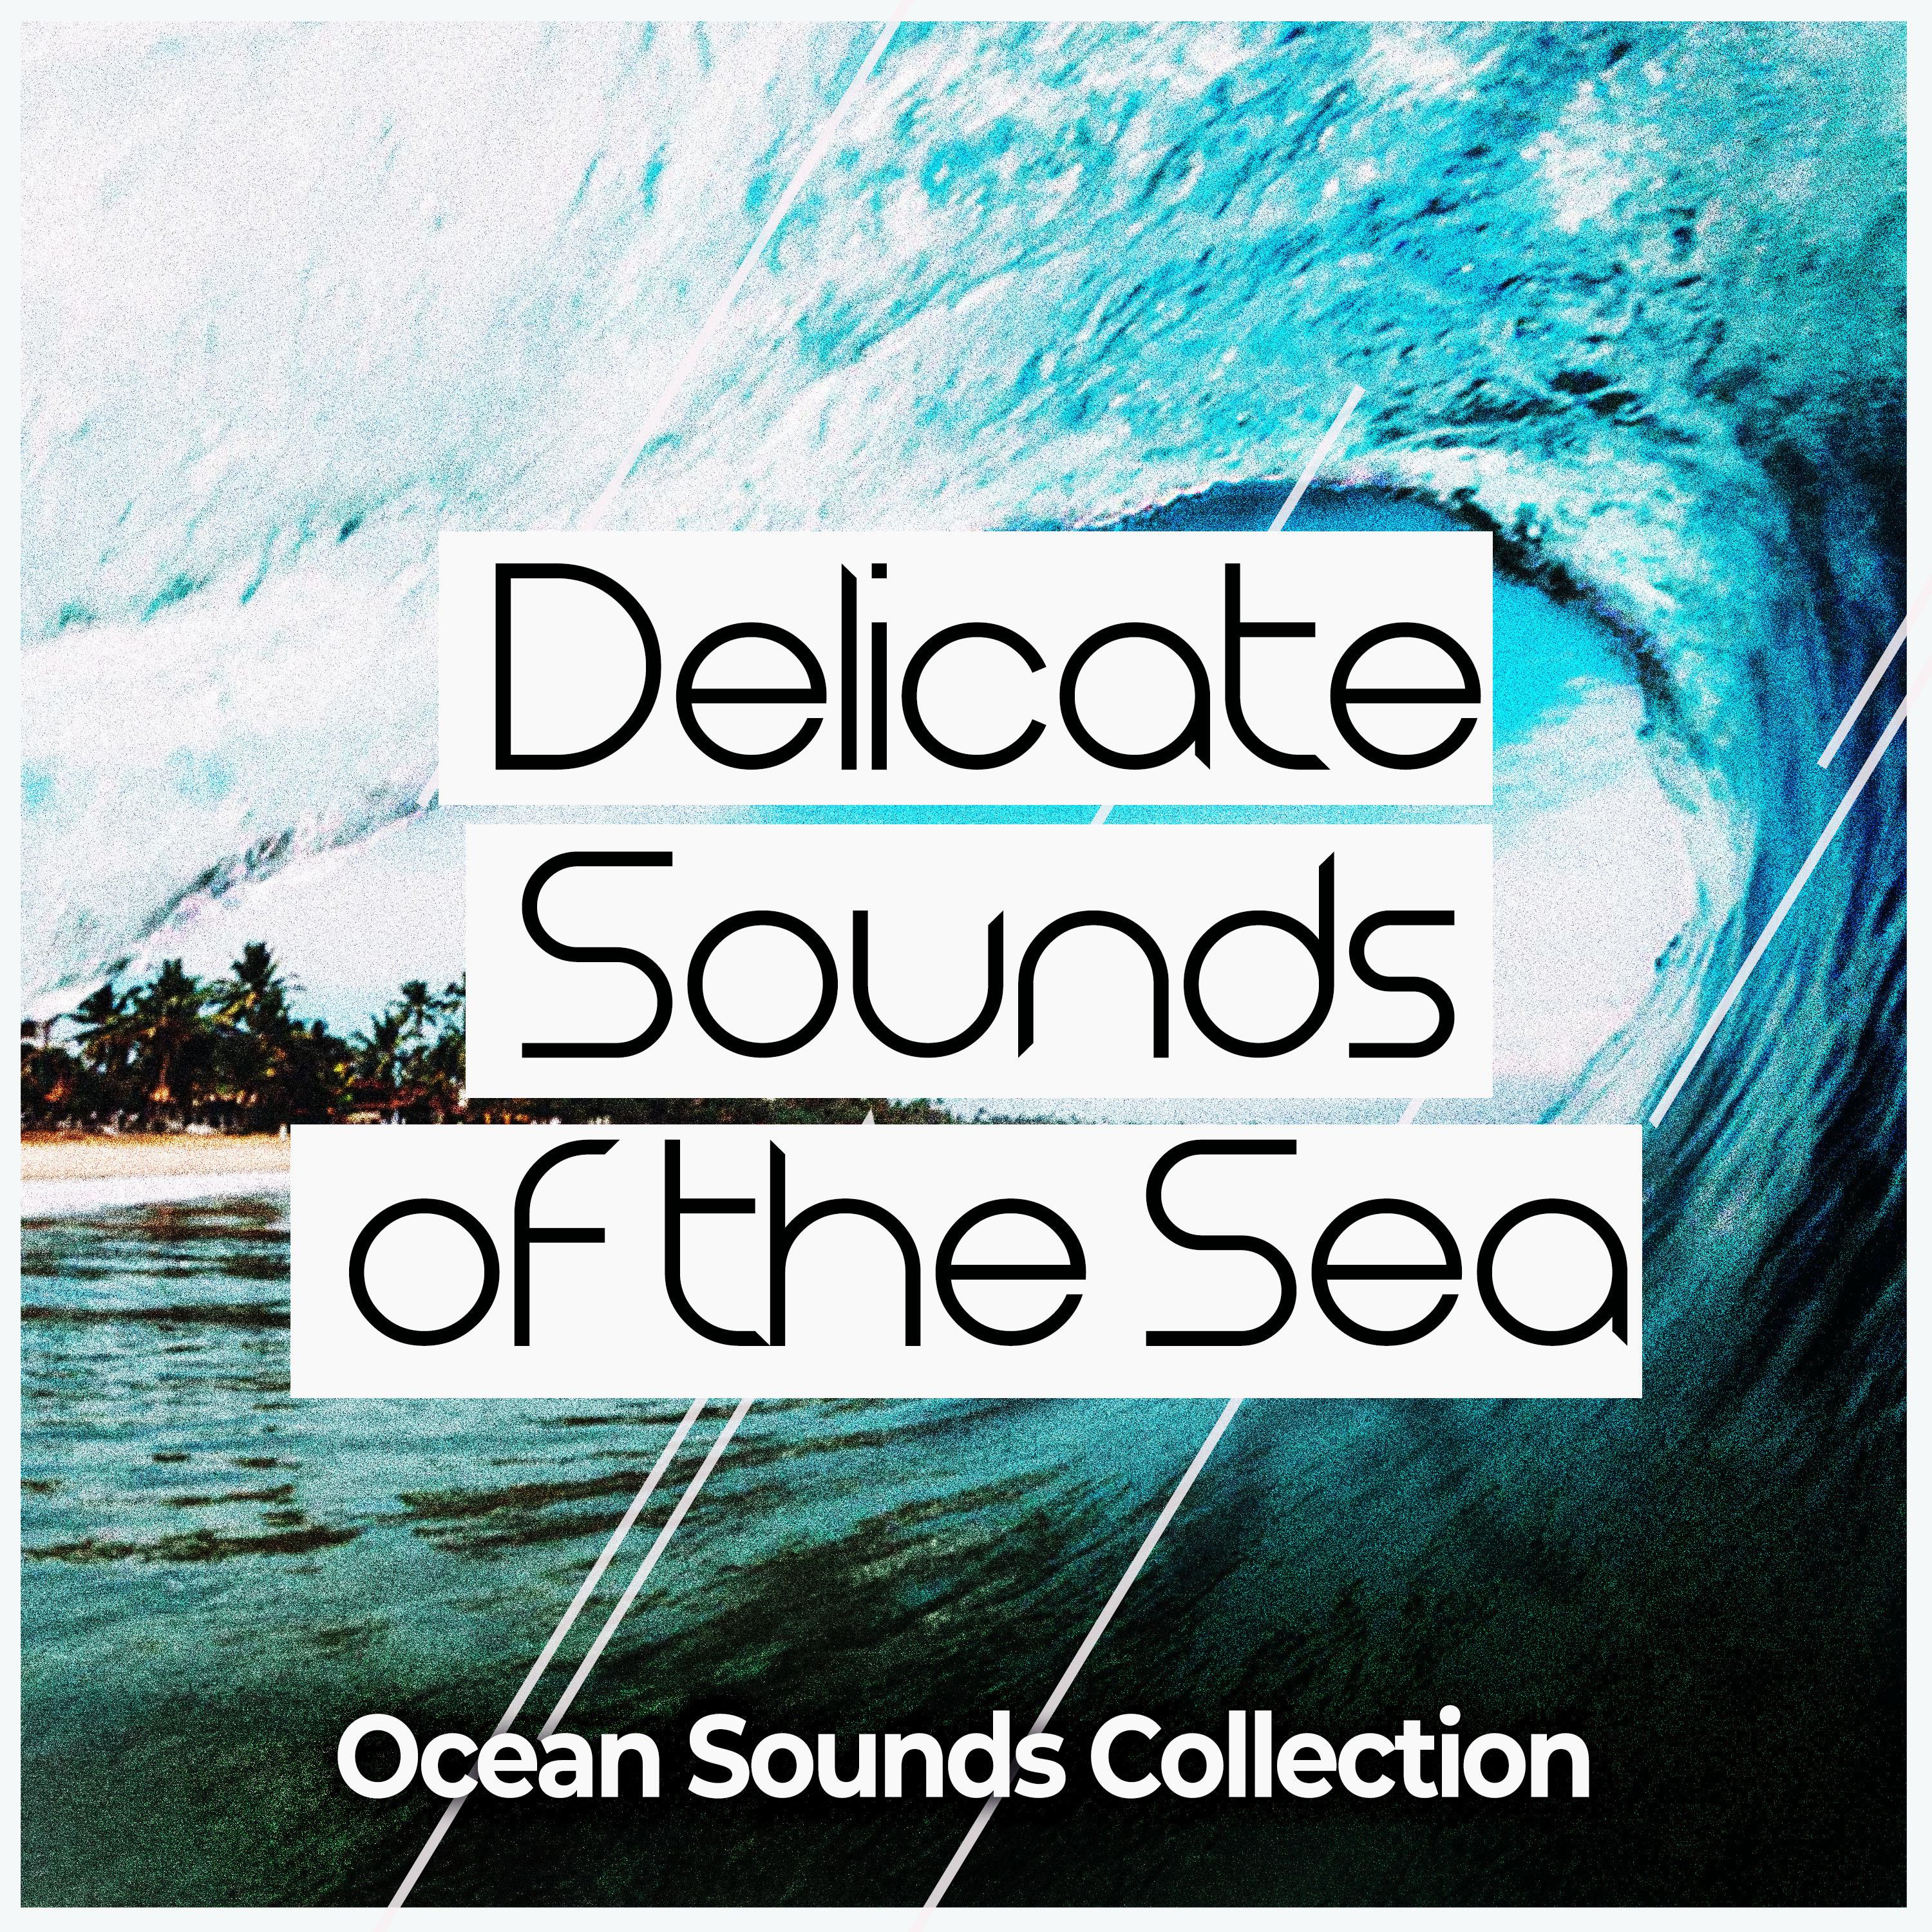 Delicate Sounds of the Sea